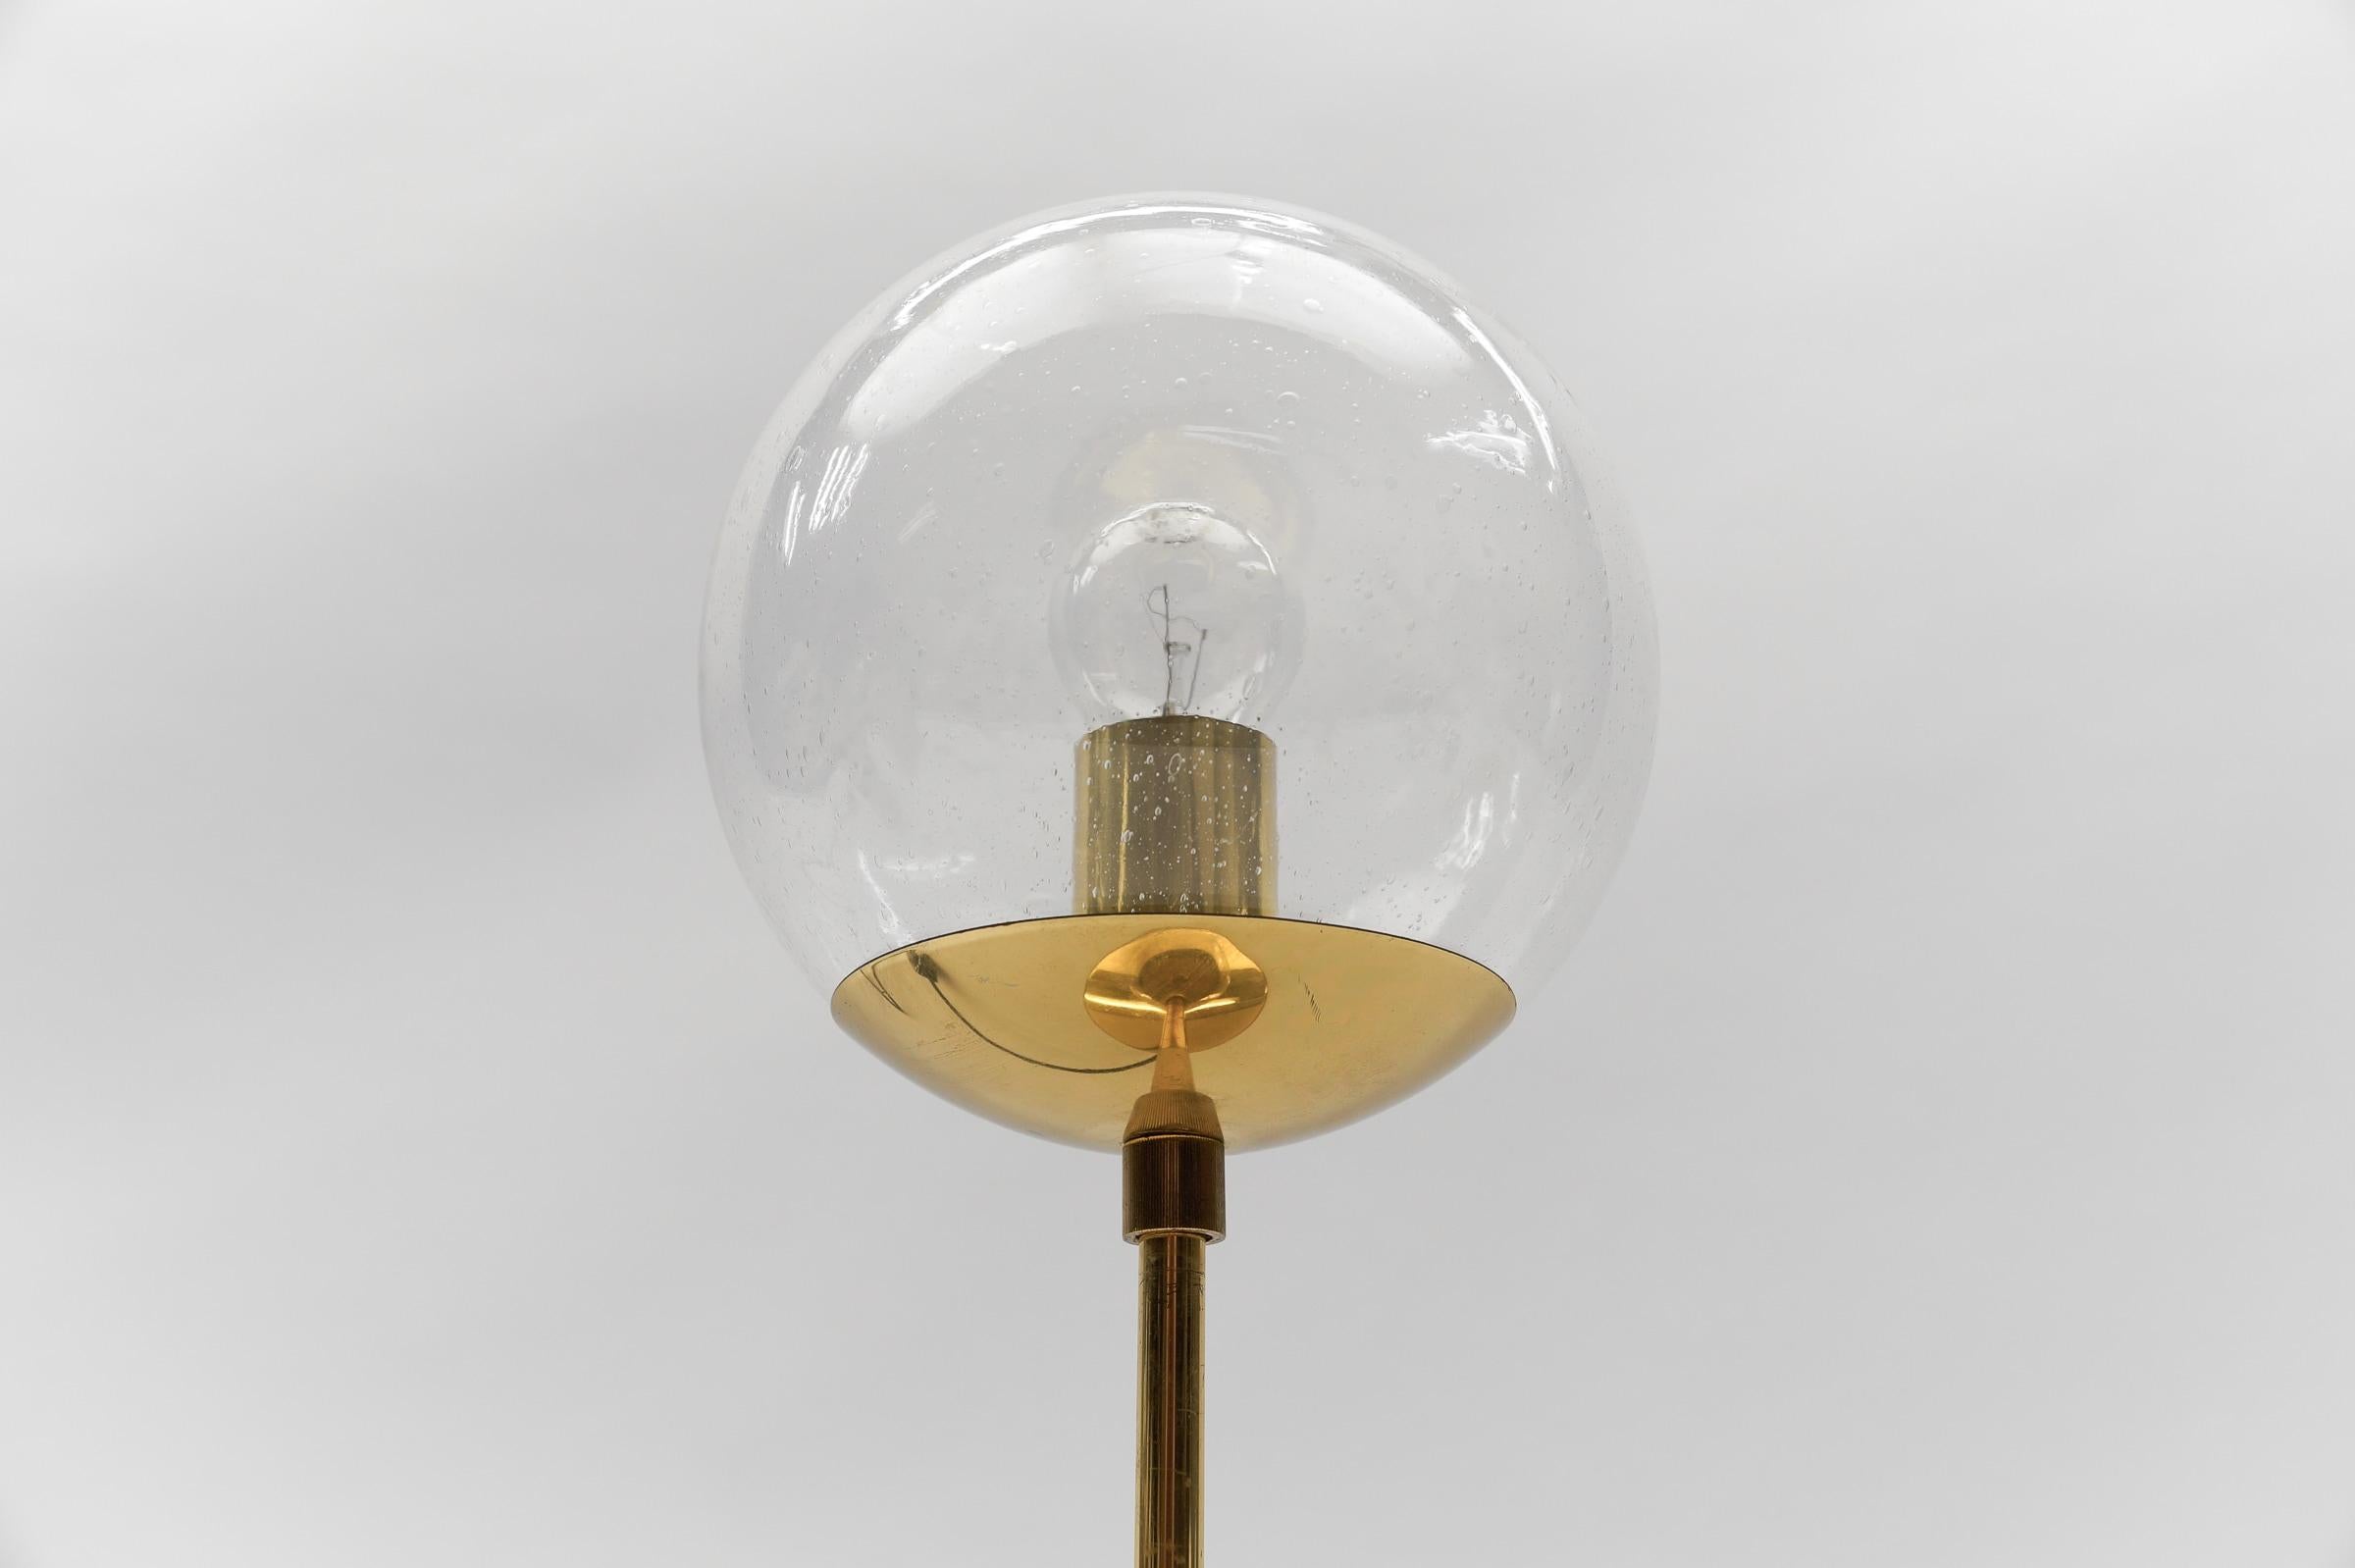 Mid-Century Modern Table Lamp made in Brass and Glass, 1960s For Sale 2